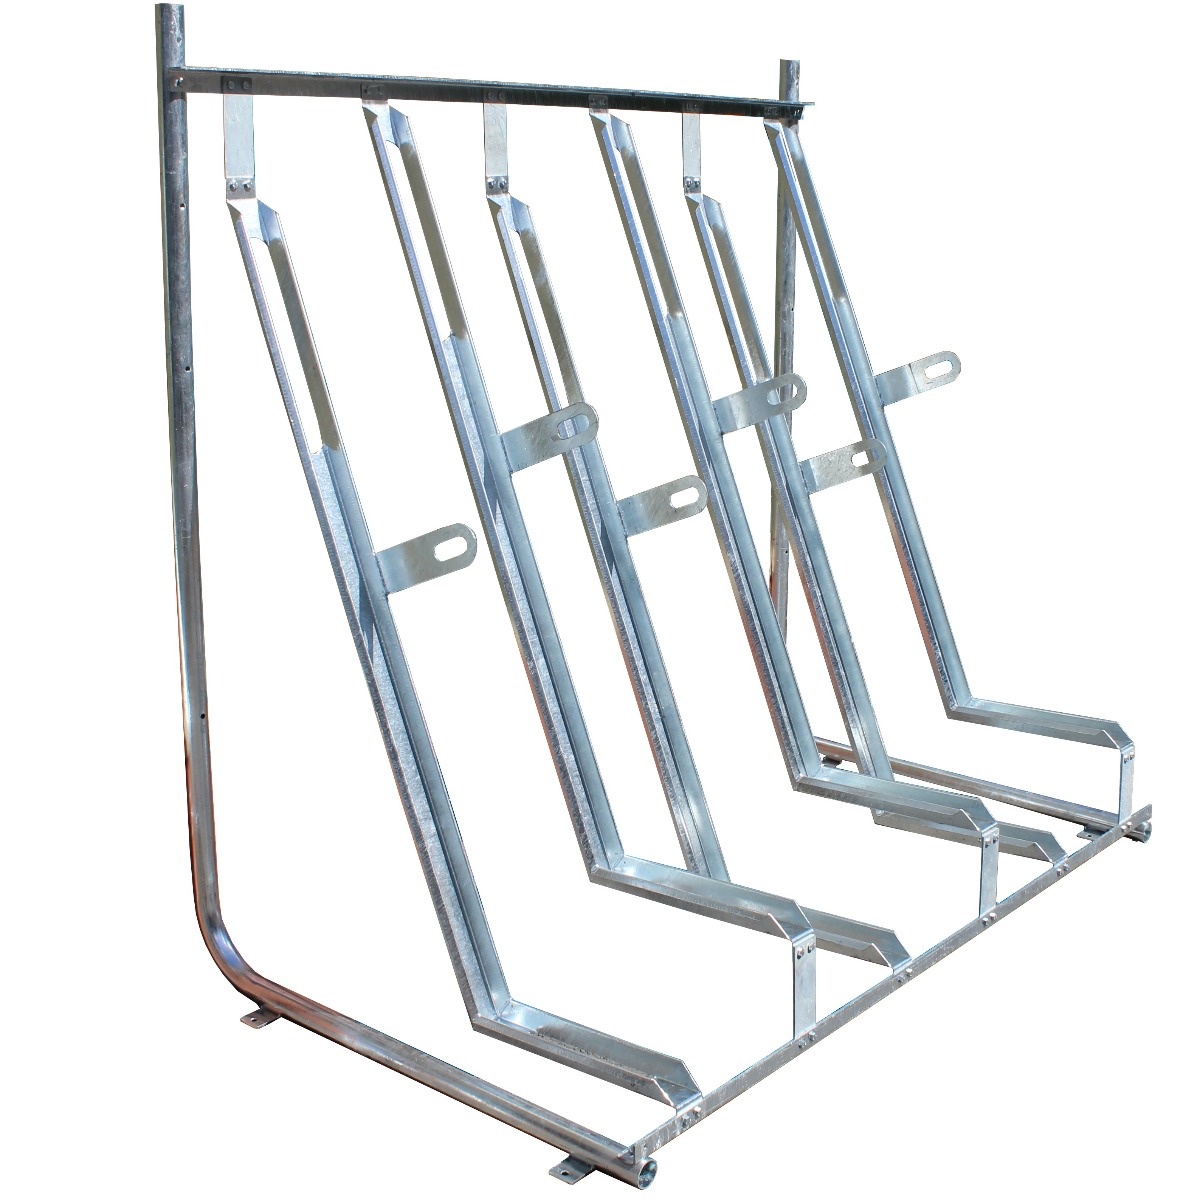 Wall-Mounted Indoor Cyclist Stations : vertical wall bike rack